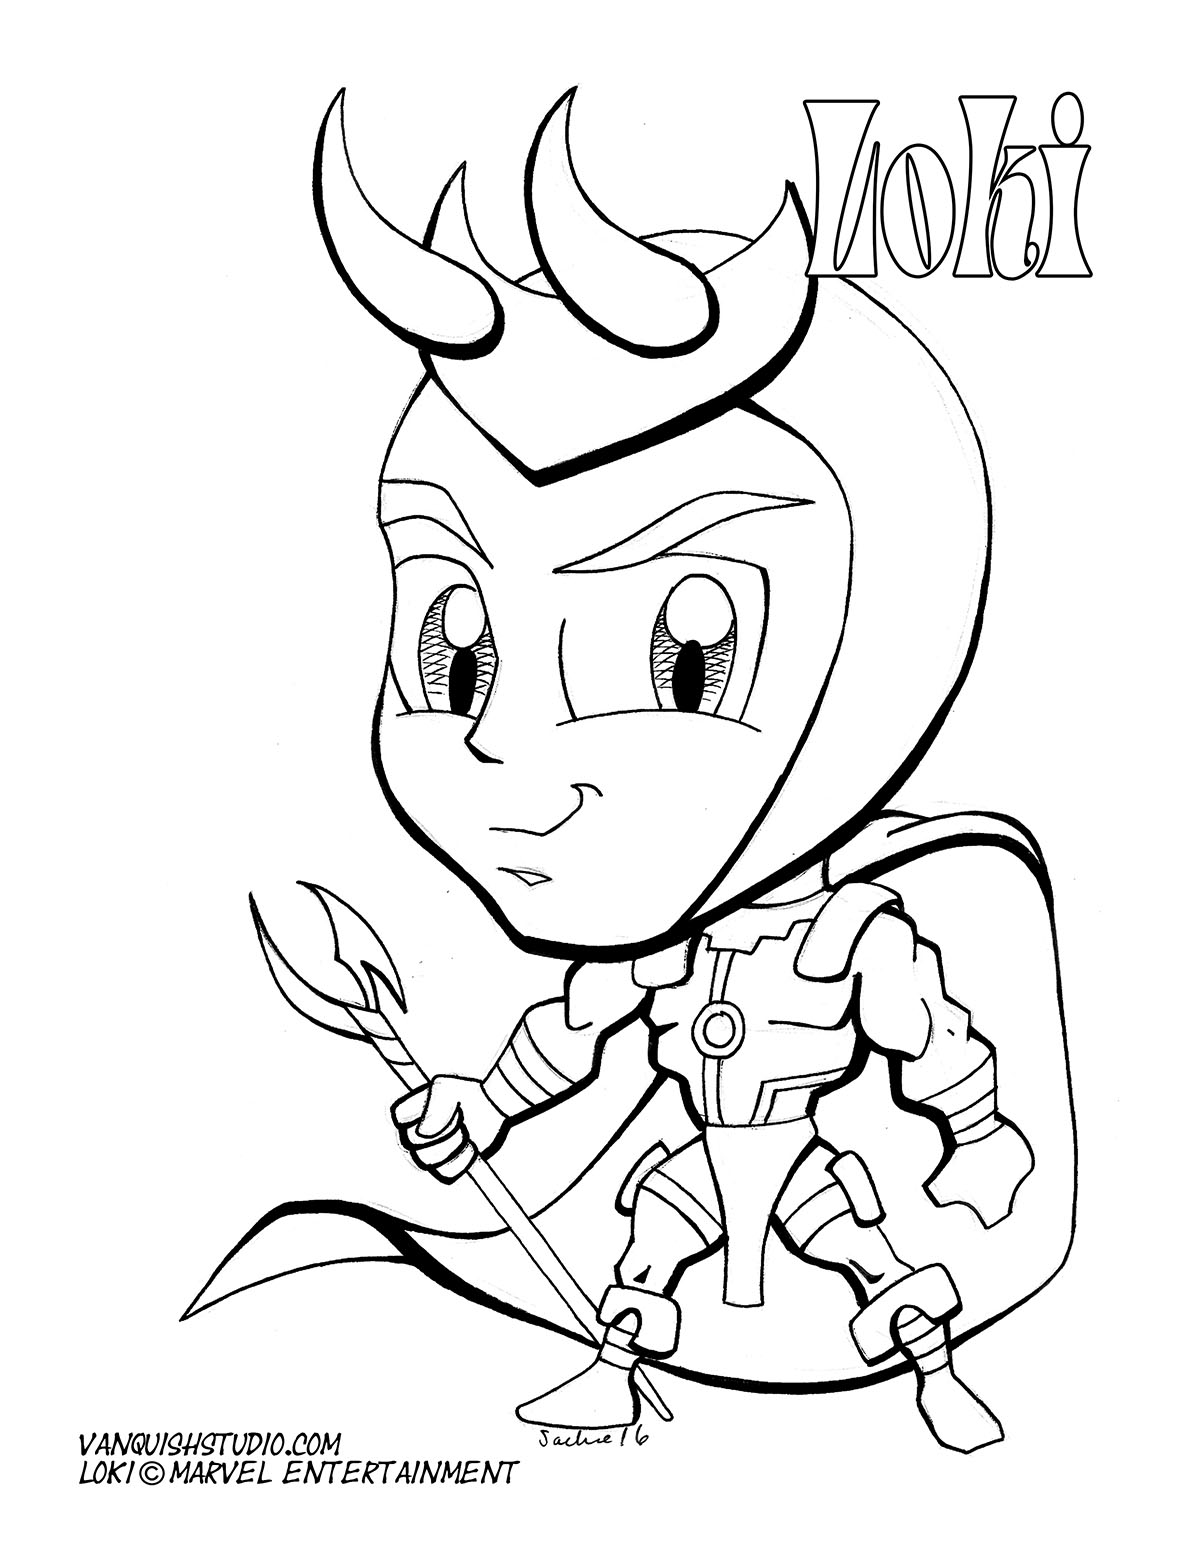 Cute Chibi Avengers Coloring Pages | Total Update